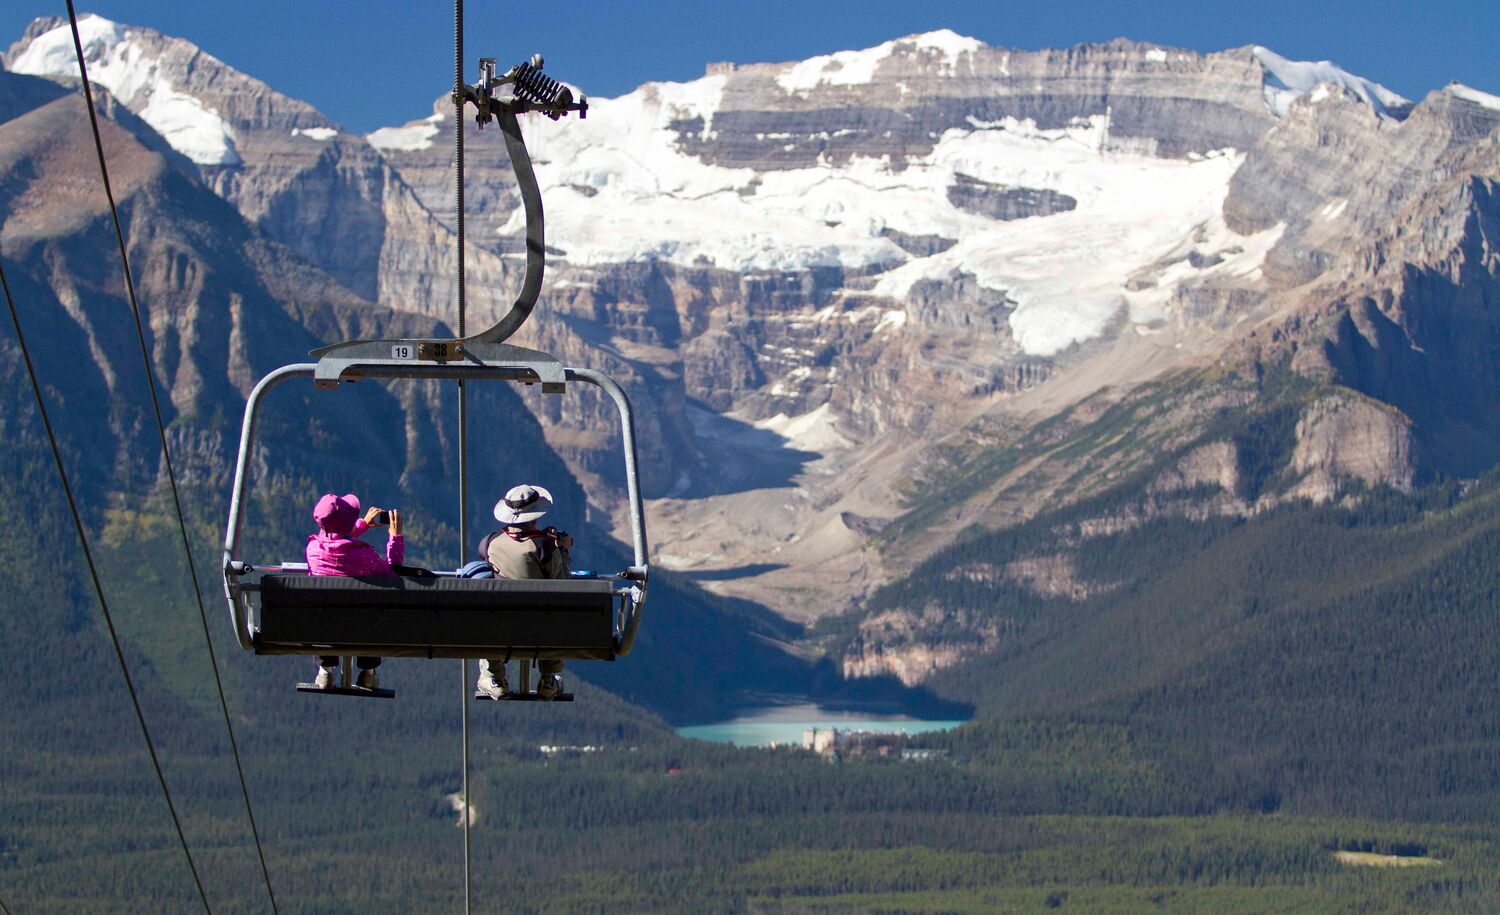 Two people ride the Lake Louise Summer Sightseeing Gondola looking out towards Lake Louise in Banff National Park.